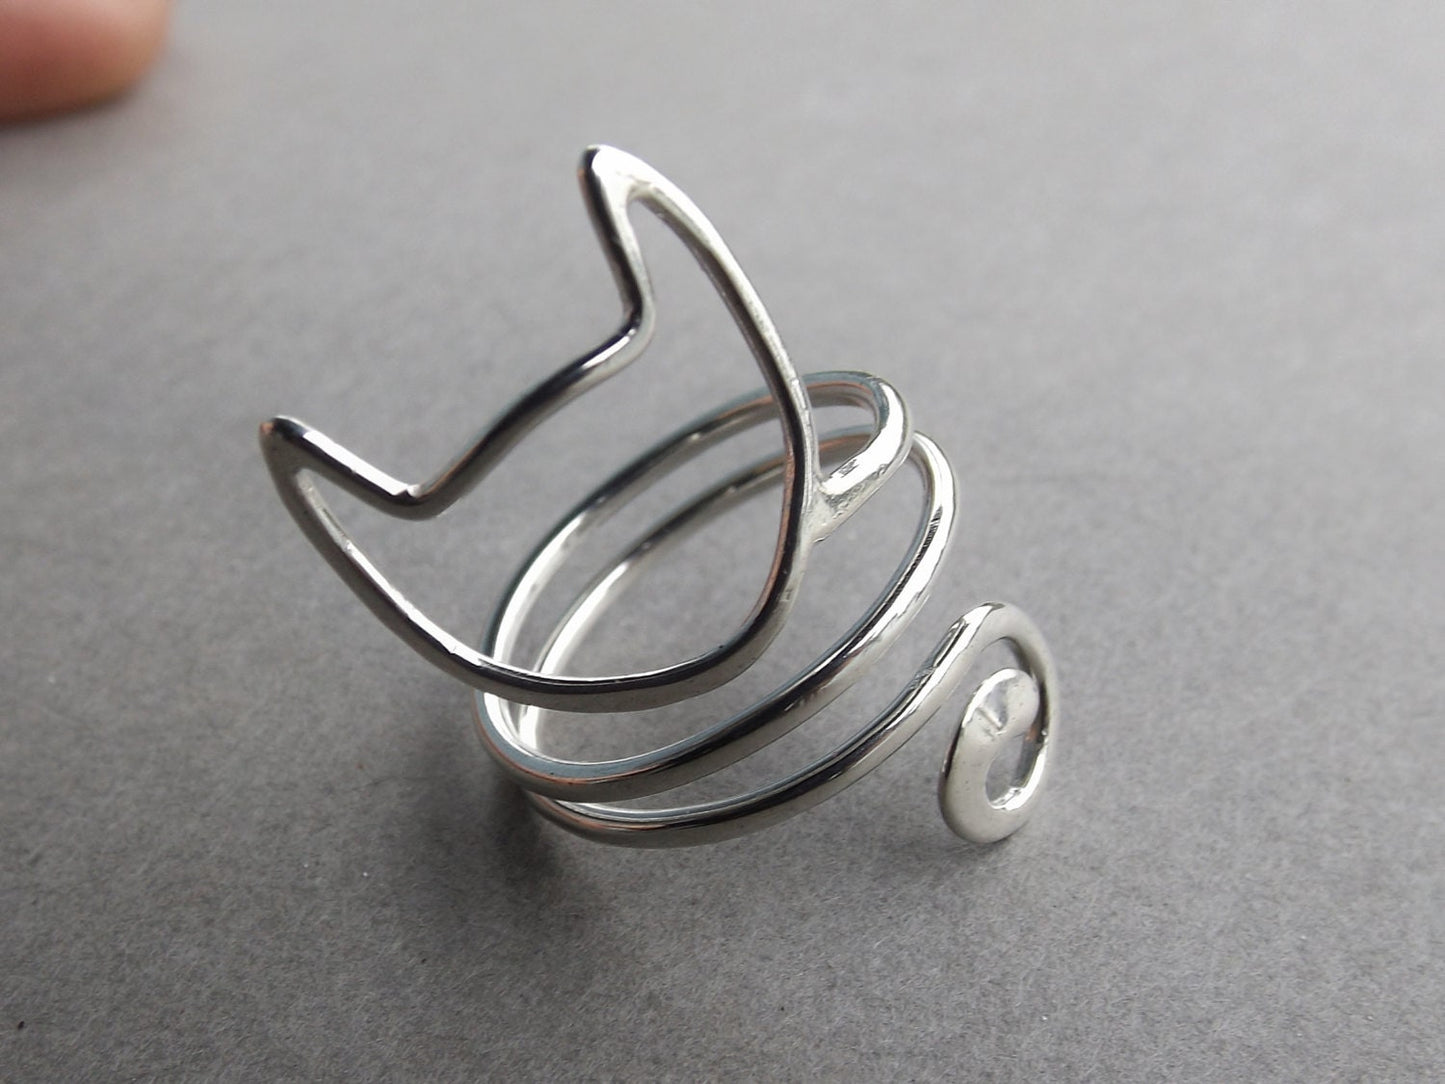 Cat Ring, Sterling Cat Ring, Cat Lady Ring, Cat Jewelry, Unique Cat Ring, Modern Cat Ring, Minimalist Cat Jewelry, Cats,Kitty Ring,Halloween